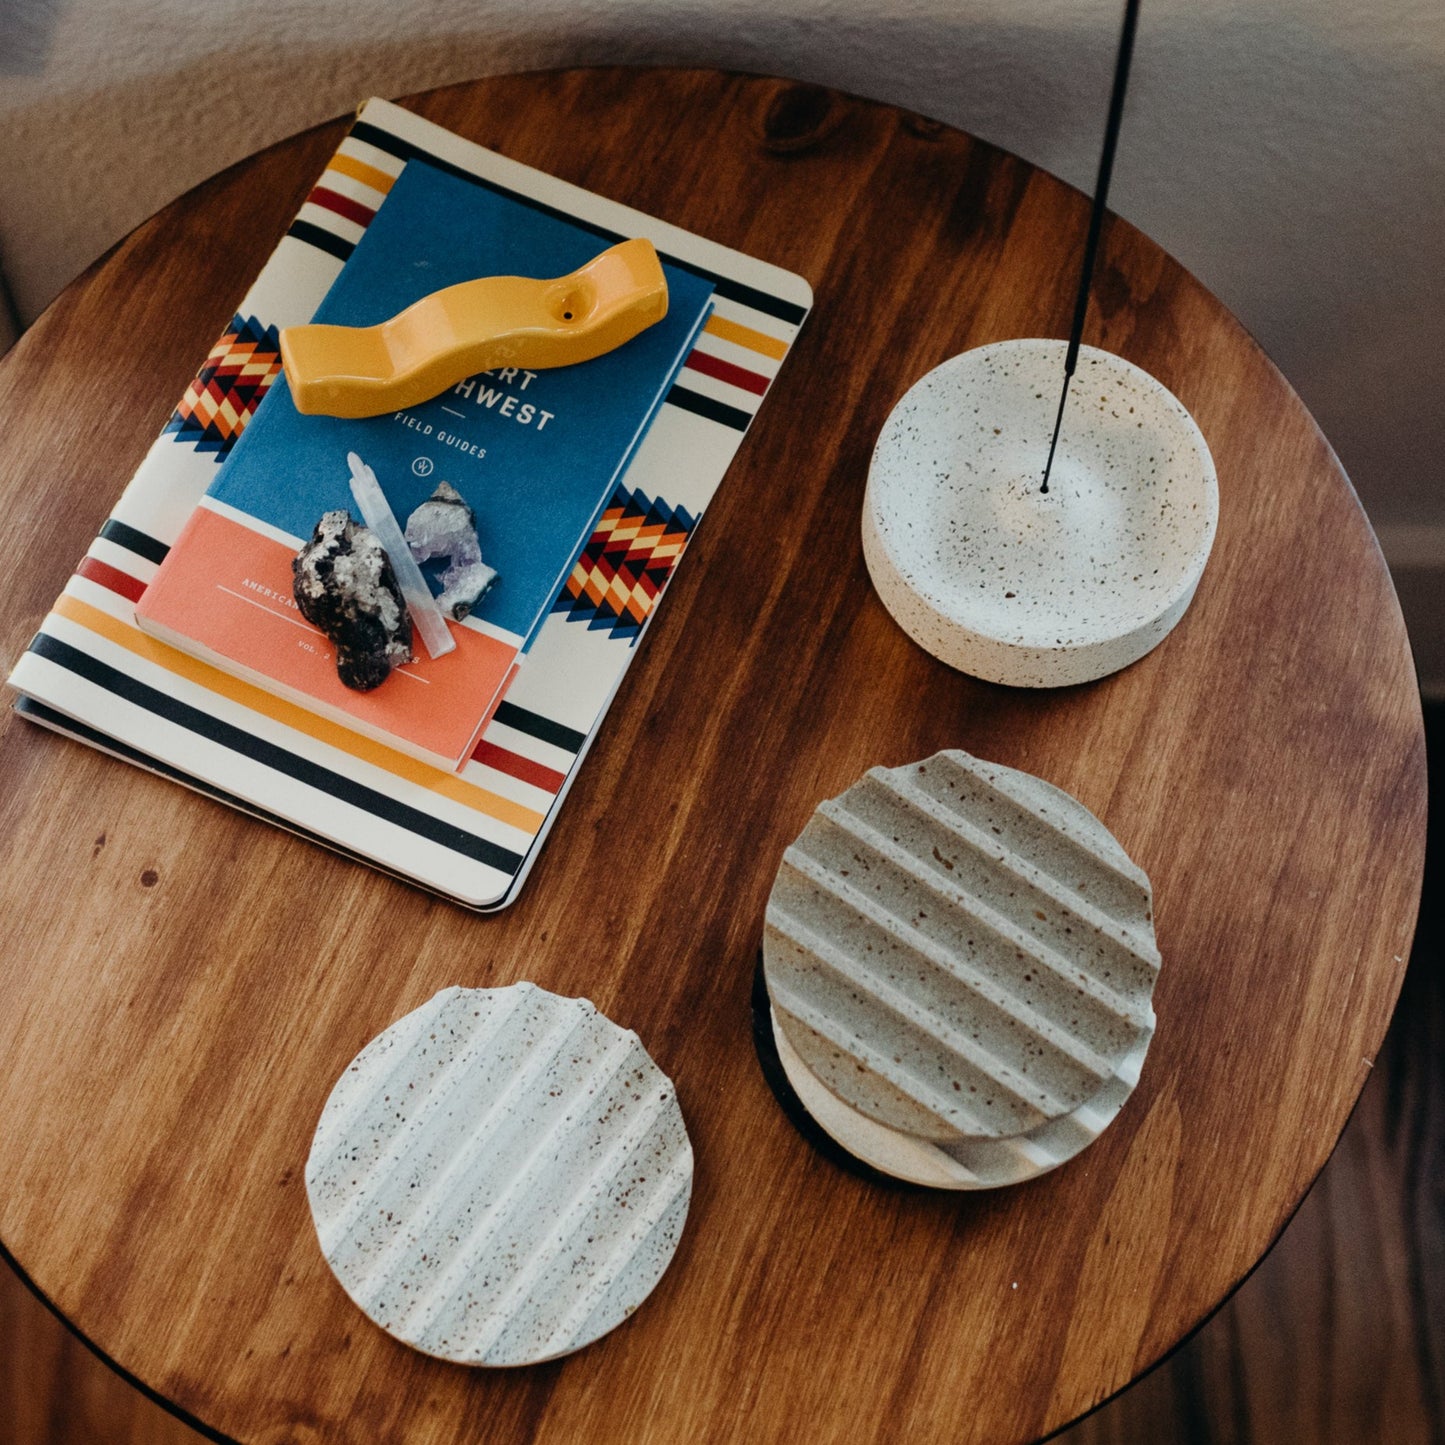 Mango gloss pipe, sitting on a side table next to a set of greyscale terrazzo coasters and white terrazzo incense dish.